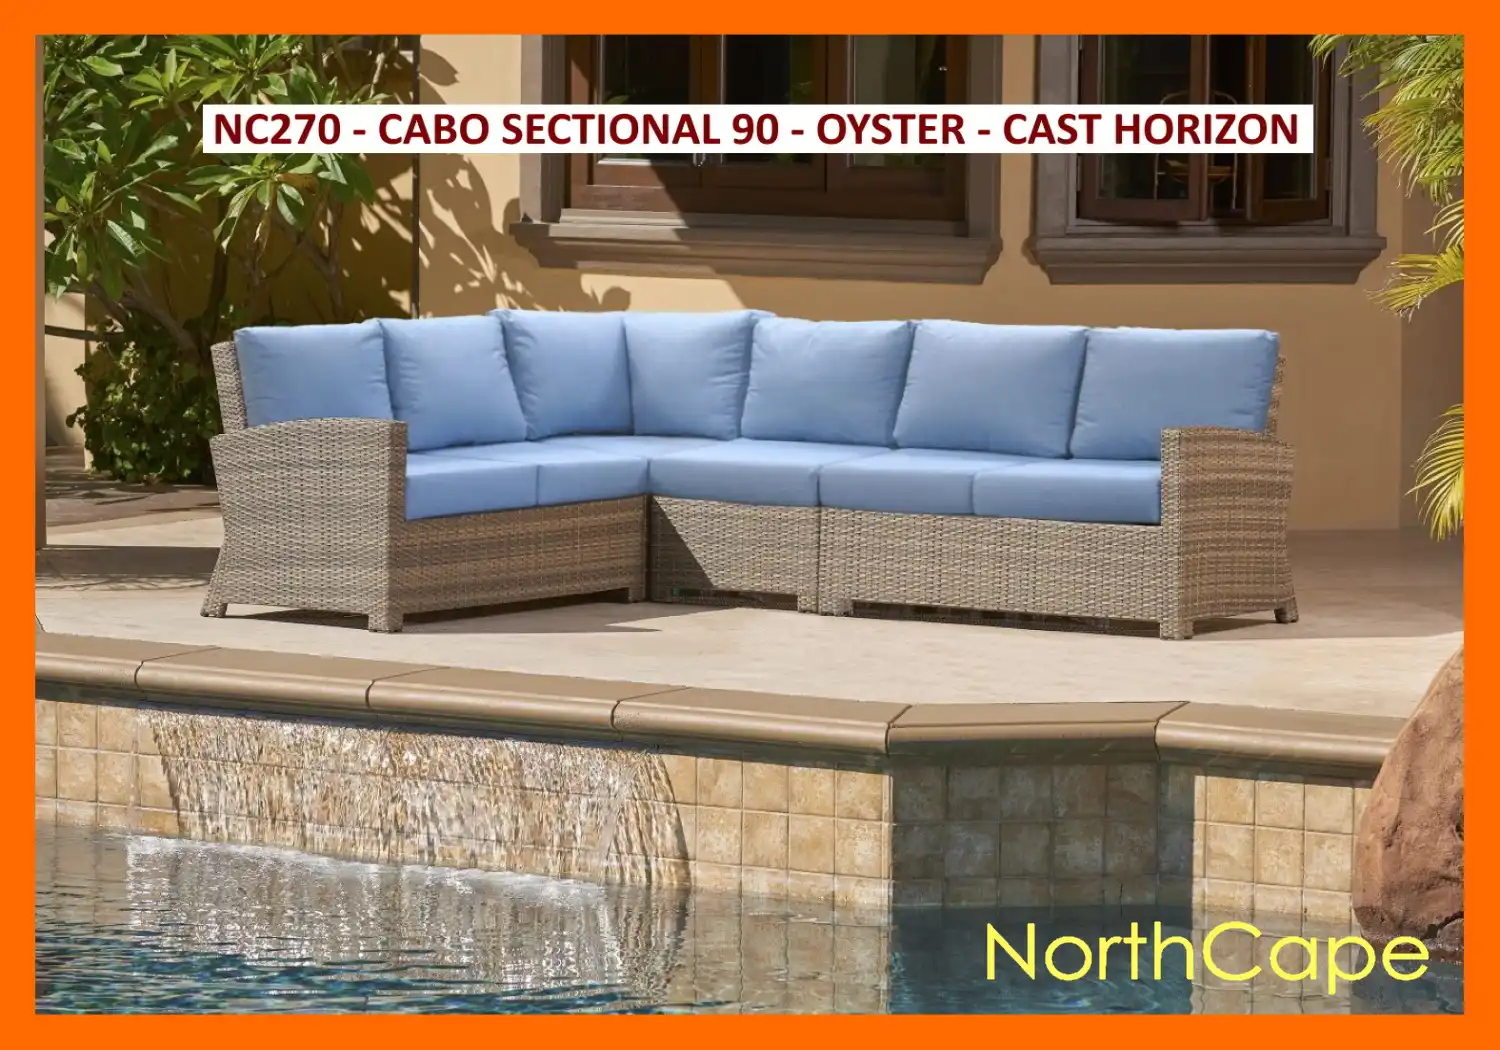 NC0270 - CABO SECTIONAL 90 - OYSTER - CAST HORIZON